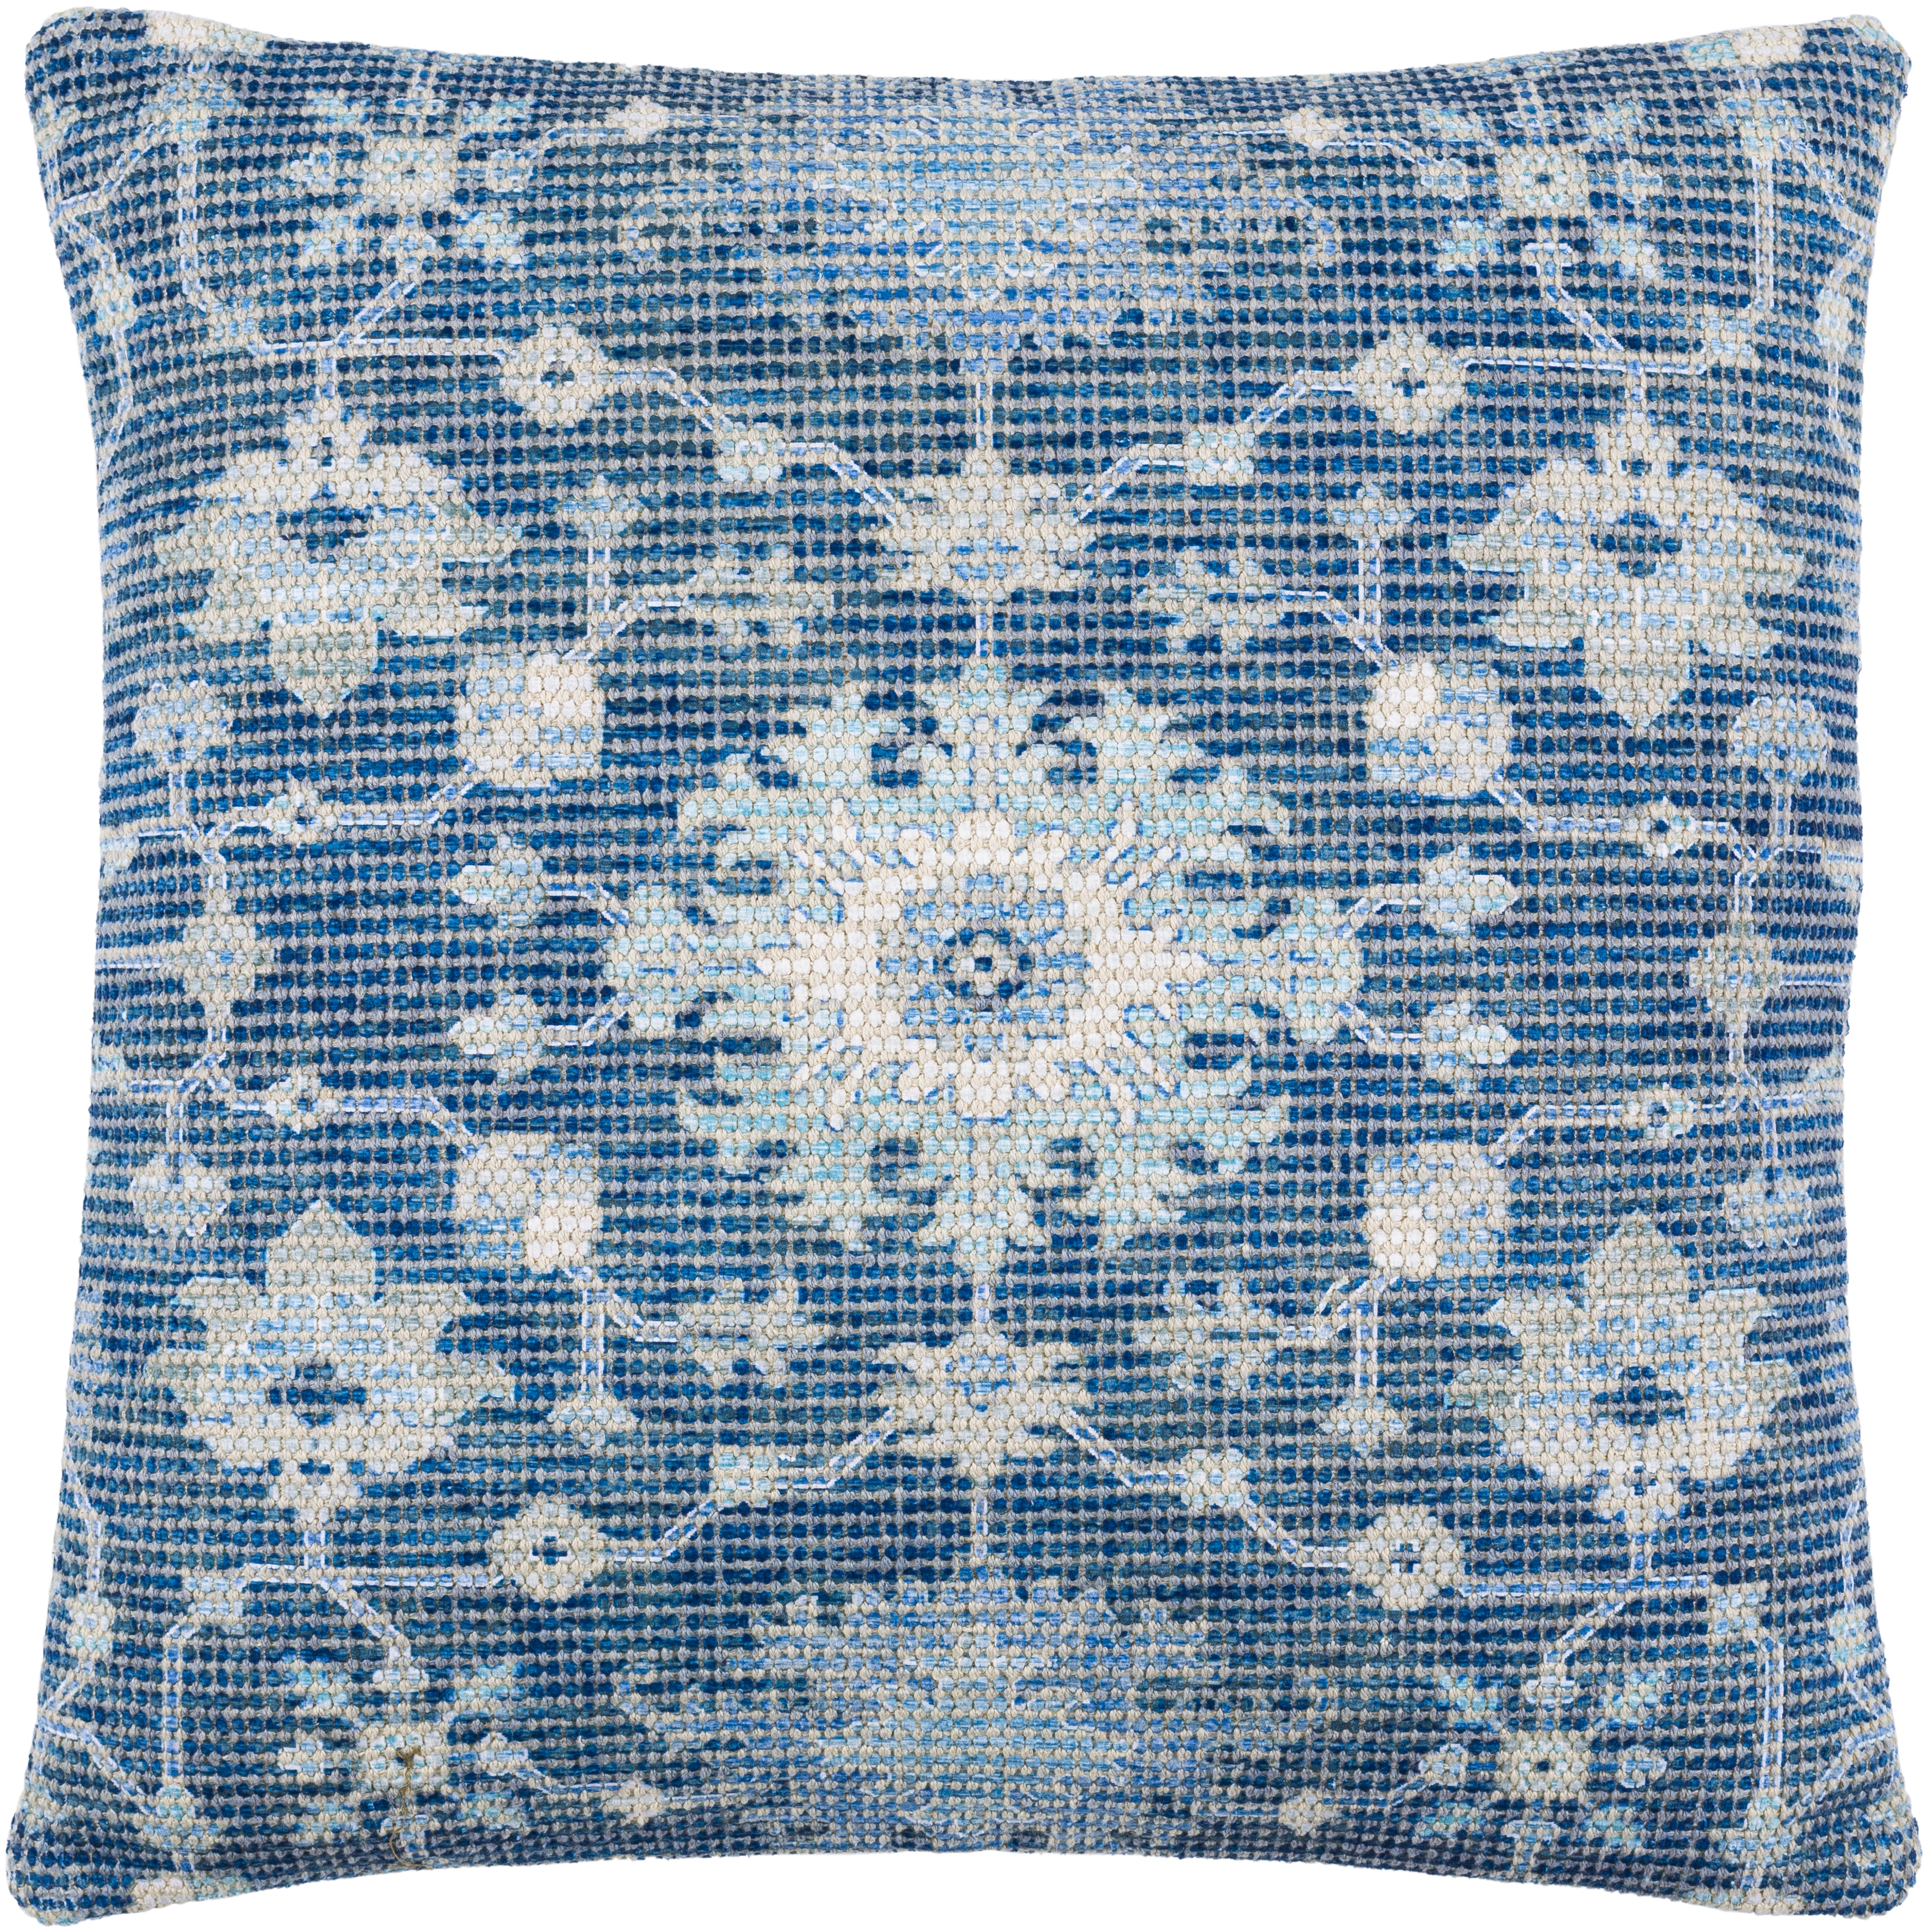 Samsun Throw Pillow, 20" x 20", with poly insert - Image 0